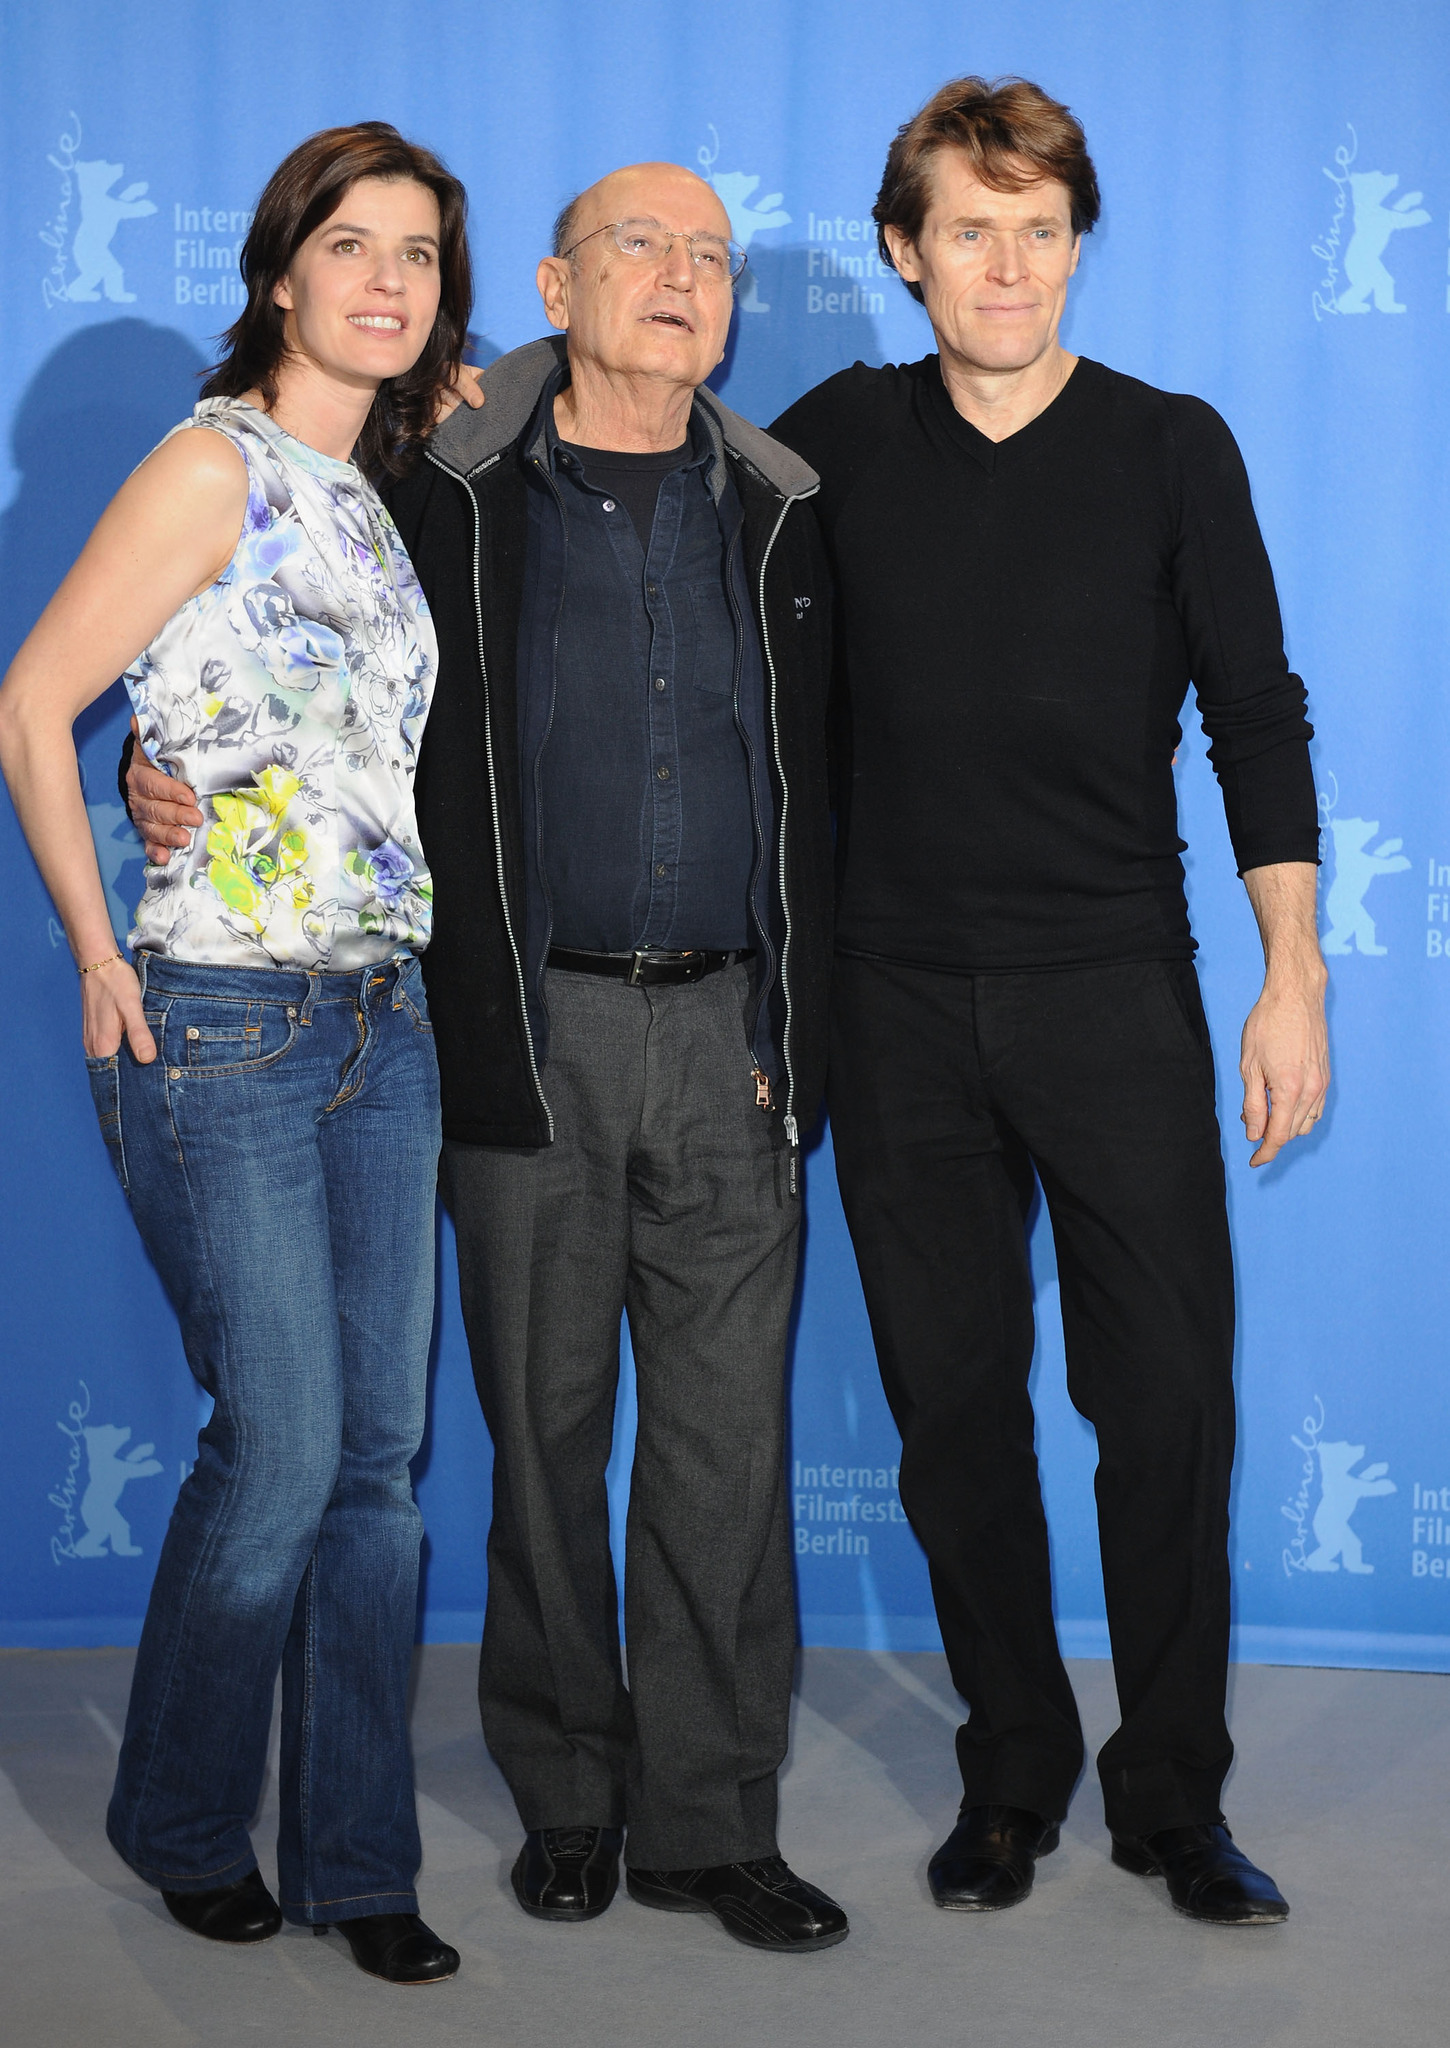 Willem Dafoe, Theodoros Angelopoulos and Irène Jacob